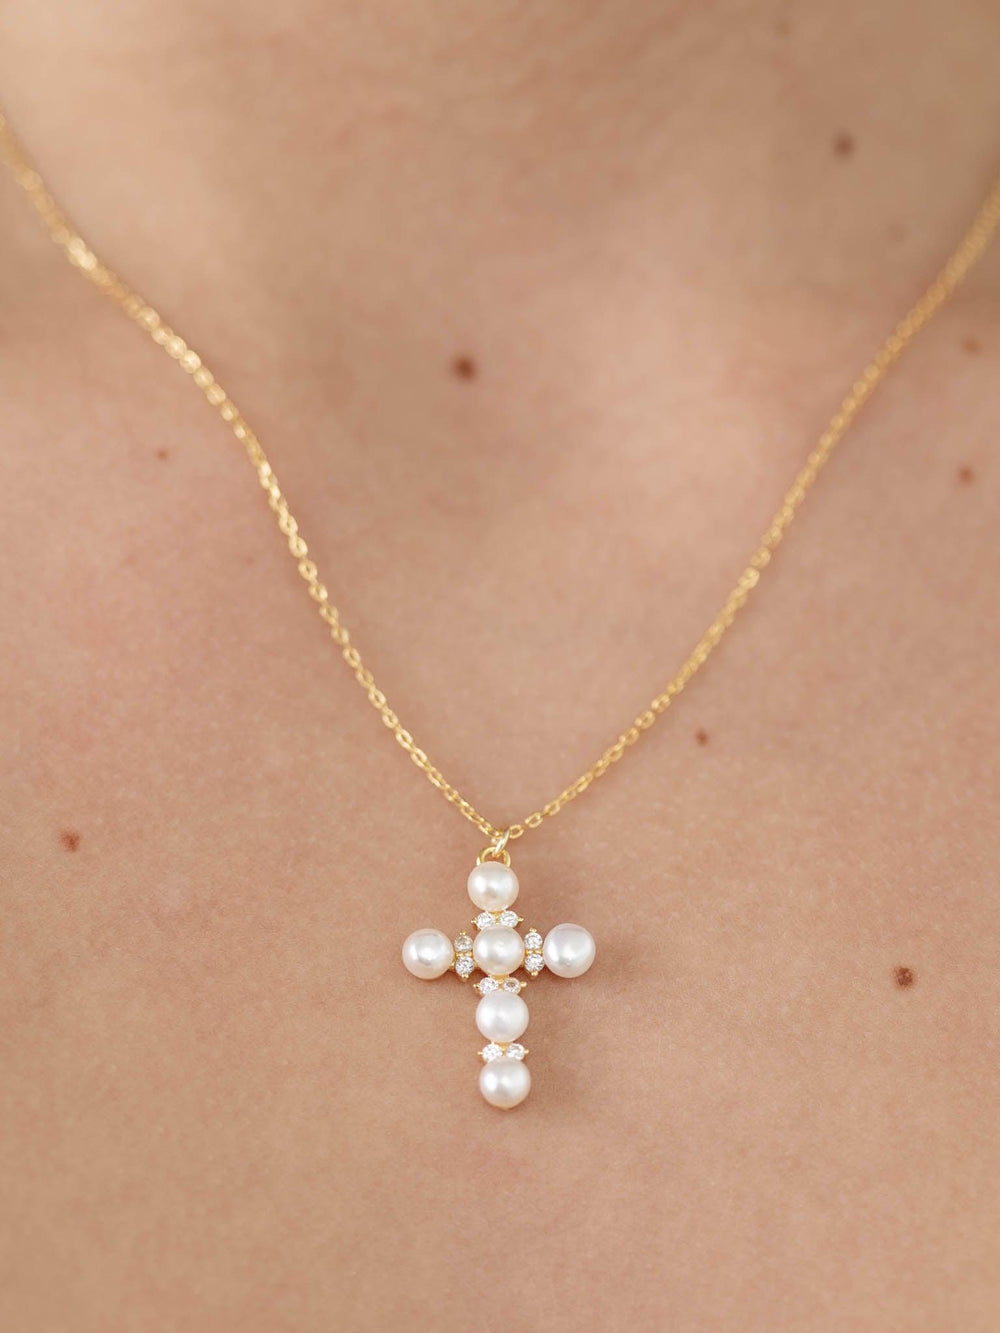 Fame-Sterling Silver Pearl Bead Cross Necklace - Leela and Lavender